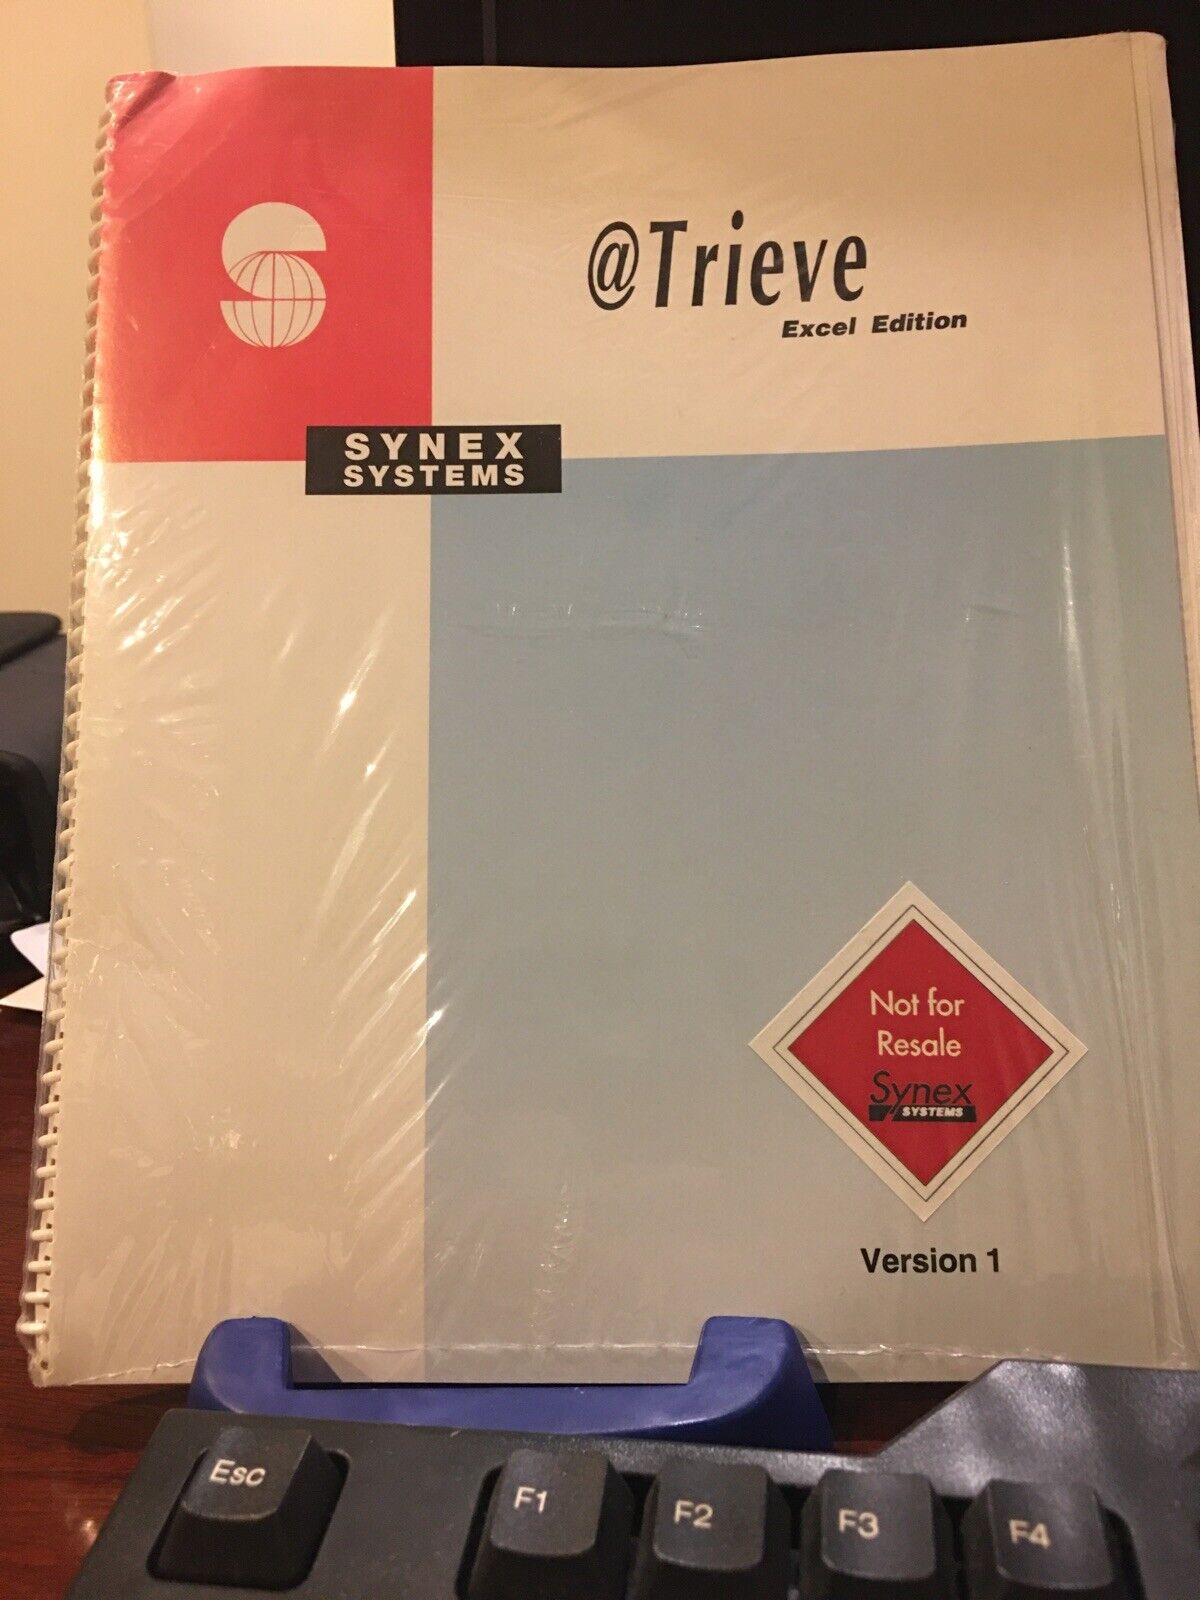 $995 Awesome Brand New @Trieve Excel Edition By Synex Systems. In Shrinkwrap NFR